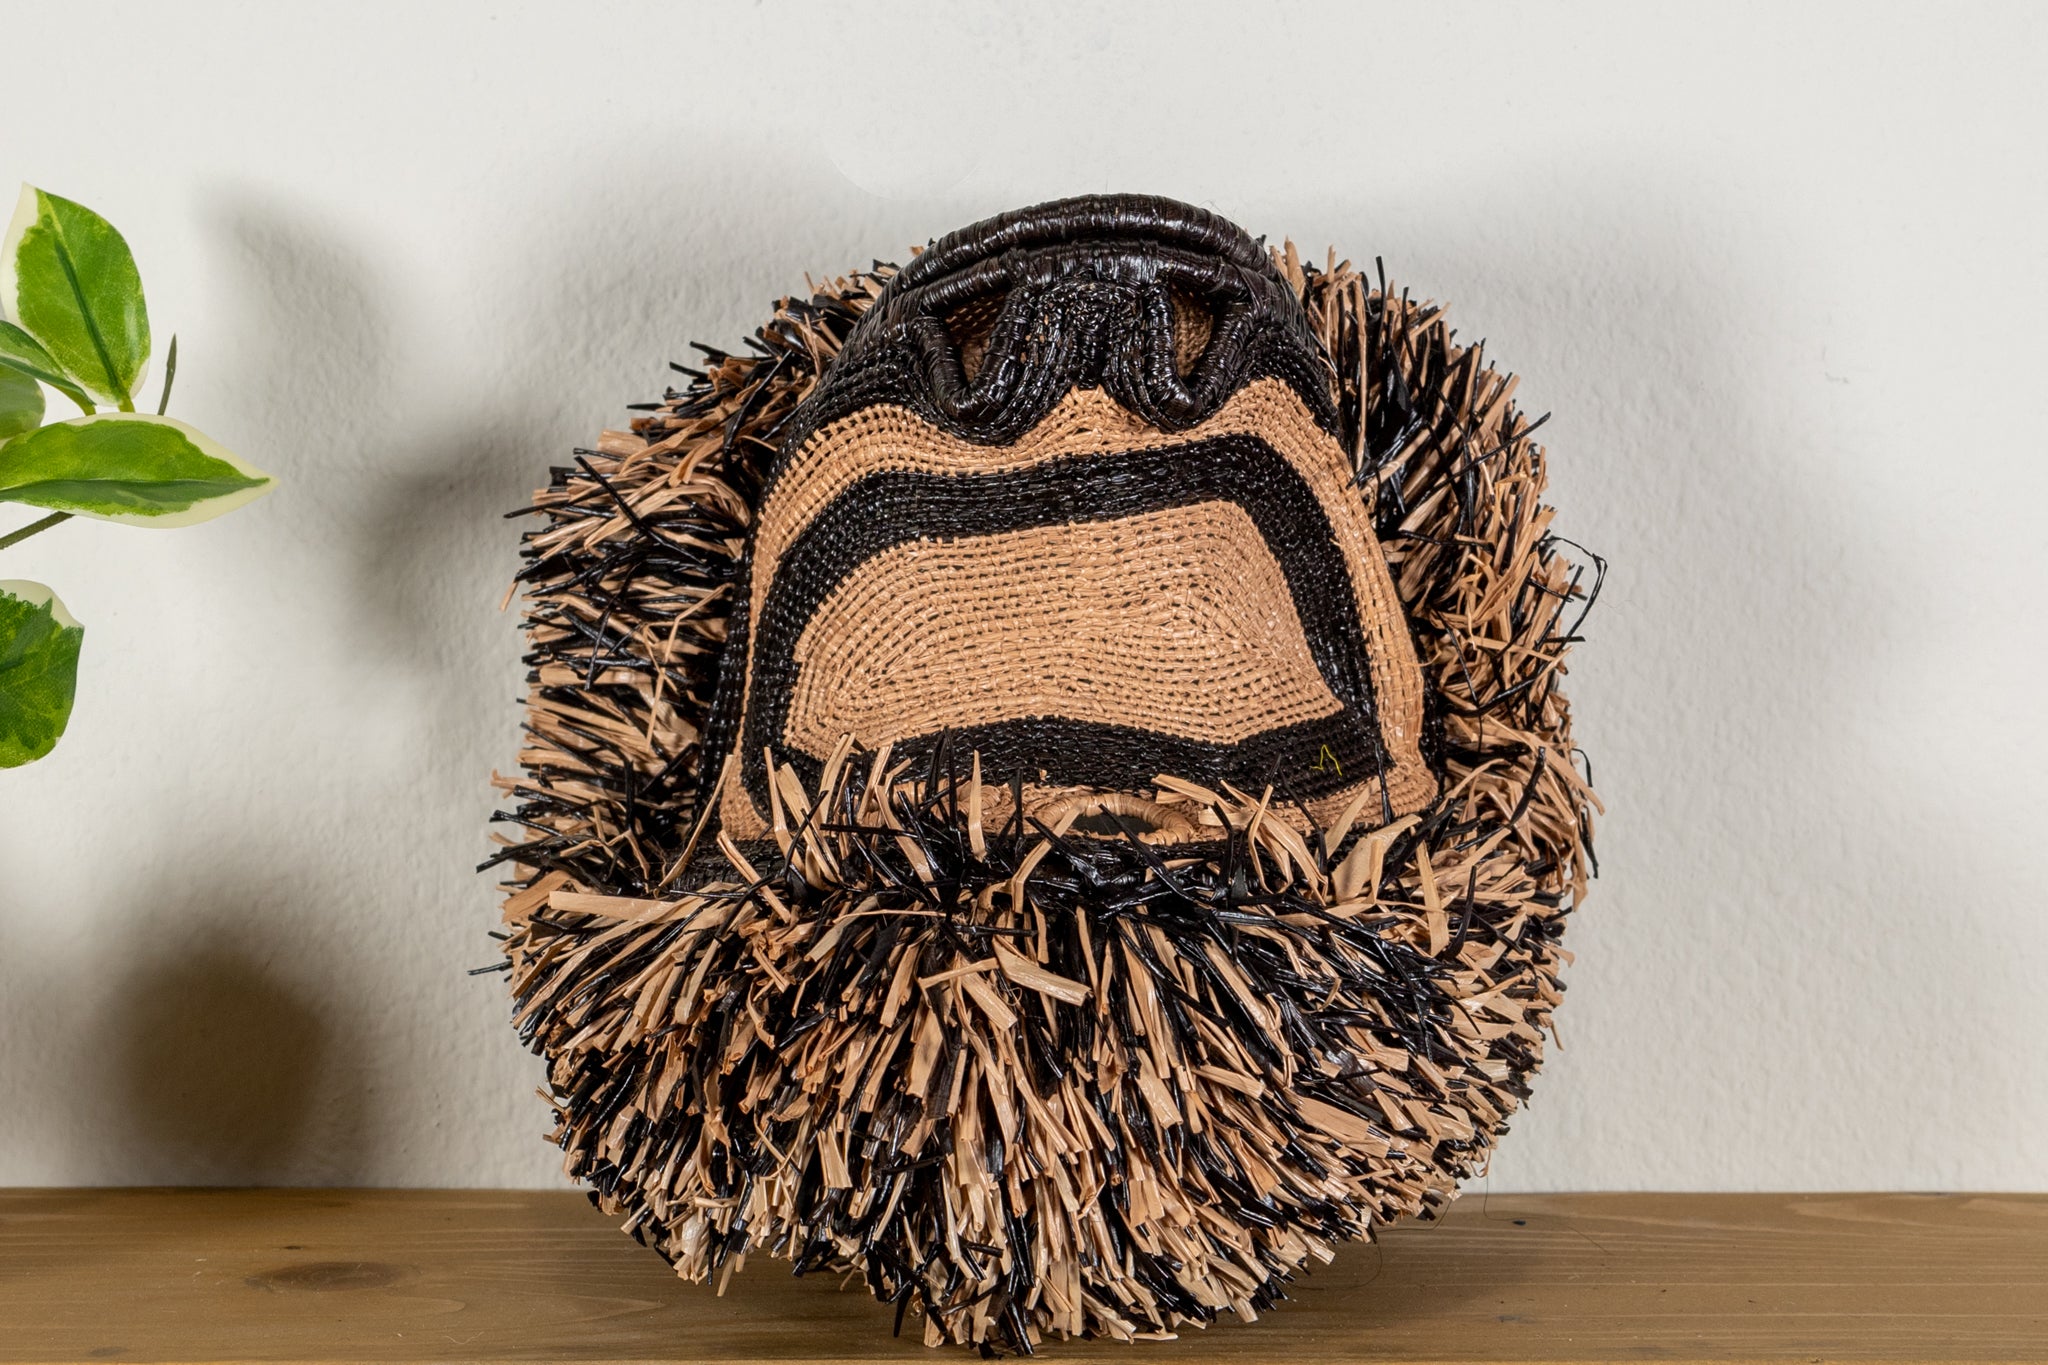 Black and Brown Spider Monkey Mask